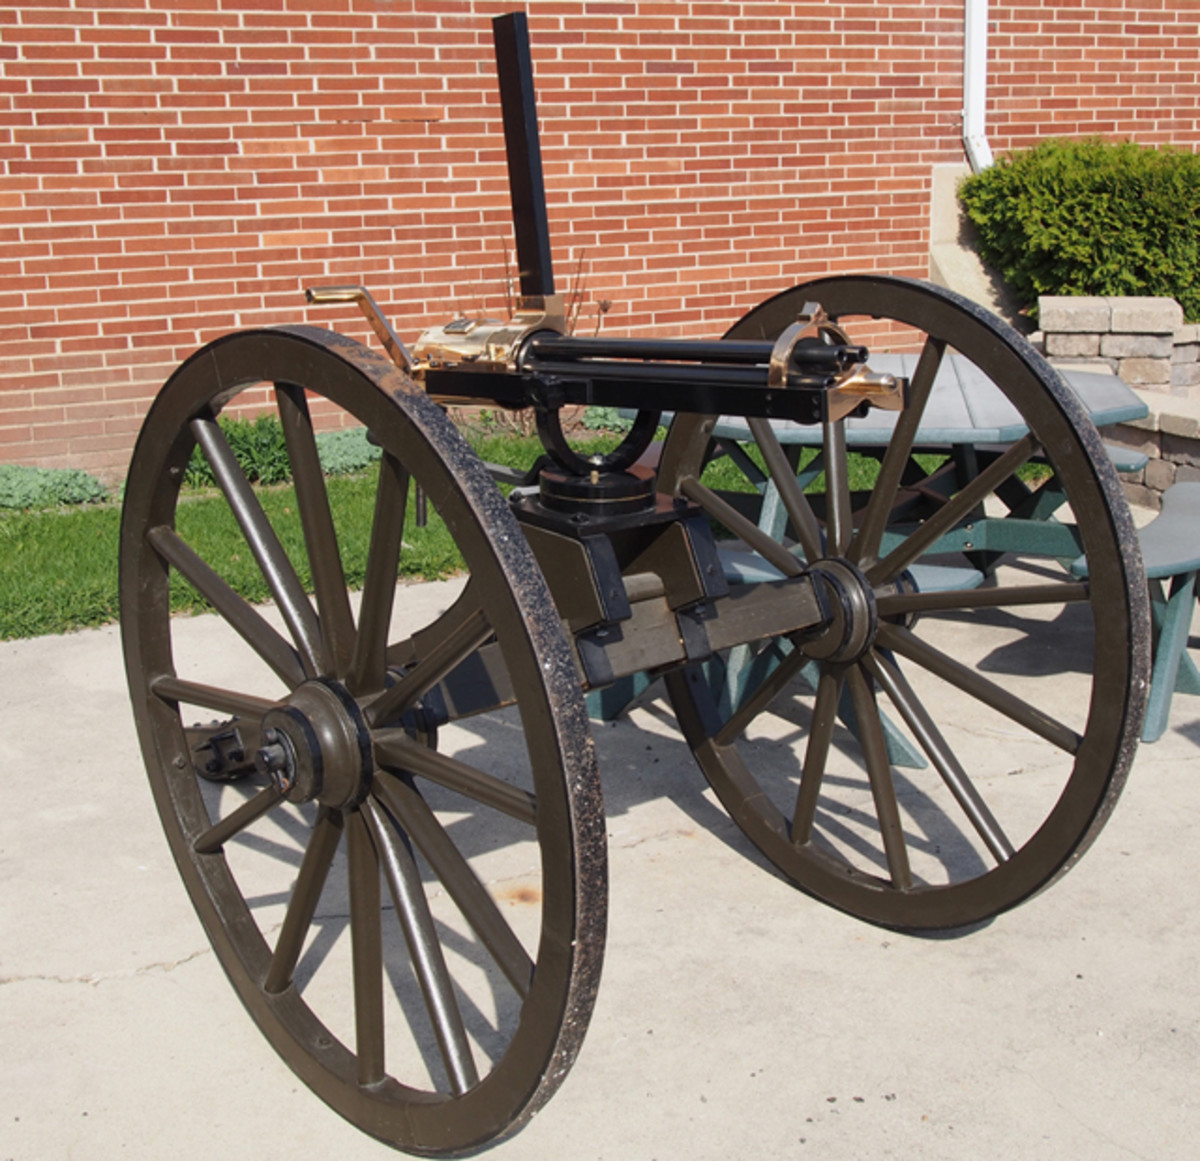 A replica 19th century Gatling Gun guarded the entrance of the DuPage County Fairgrounds for the Chicagoland's National Civil War & Military Extravaganza.